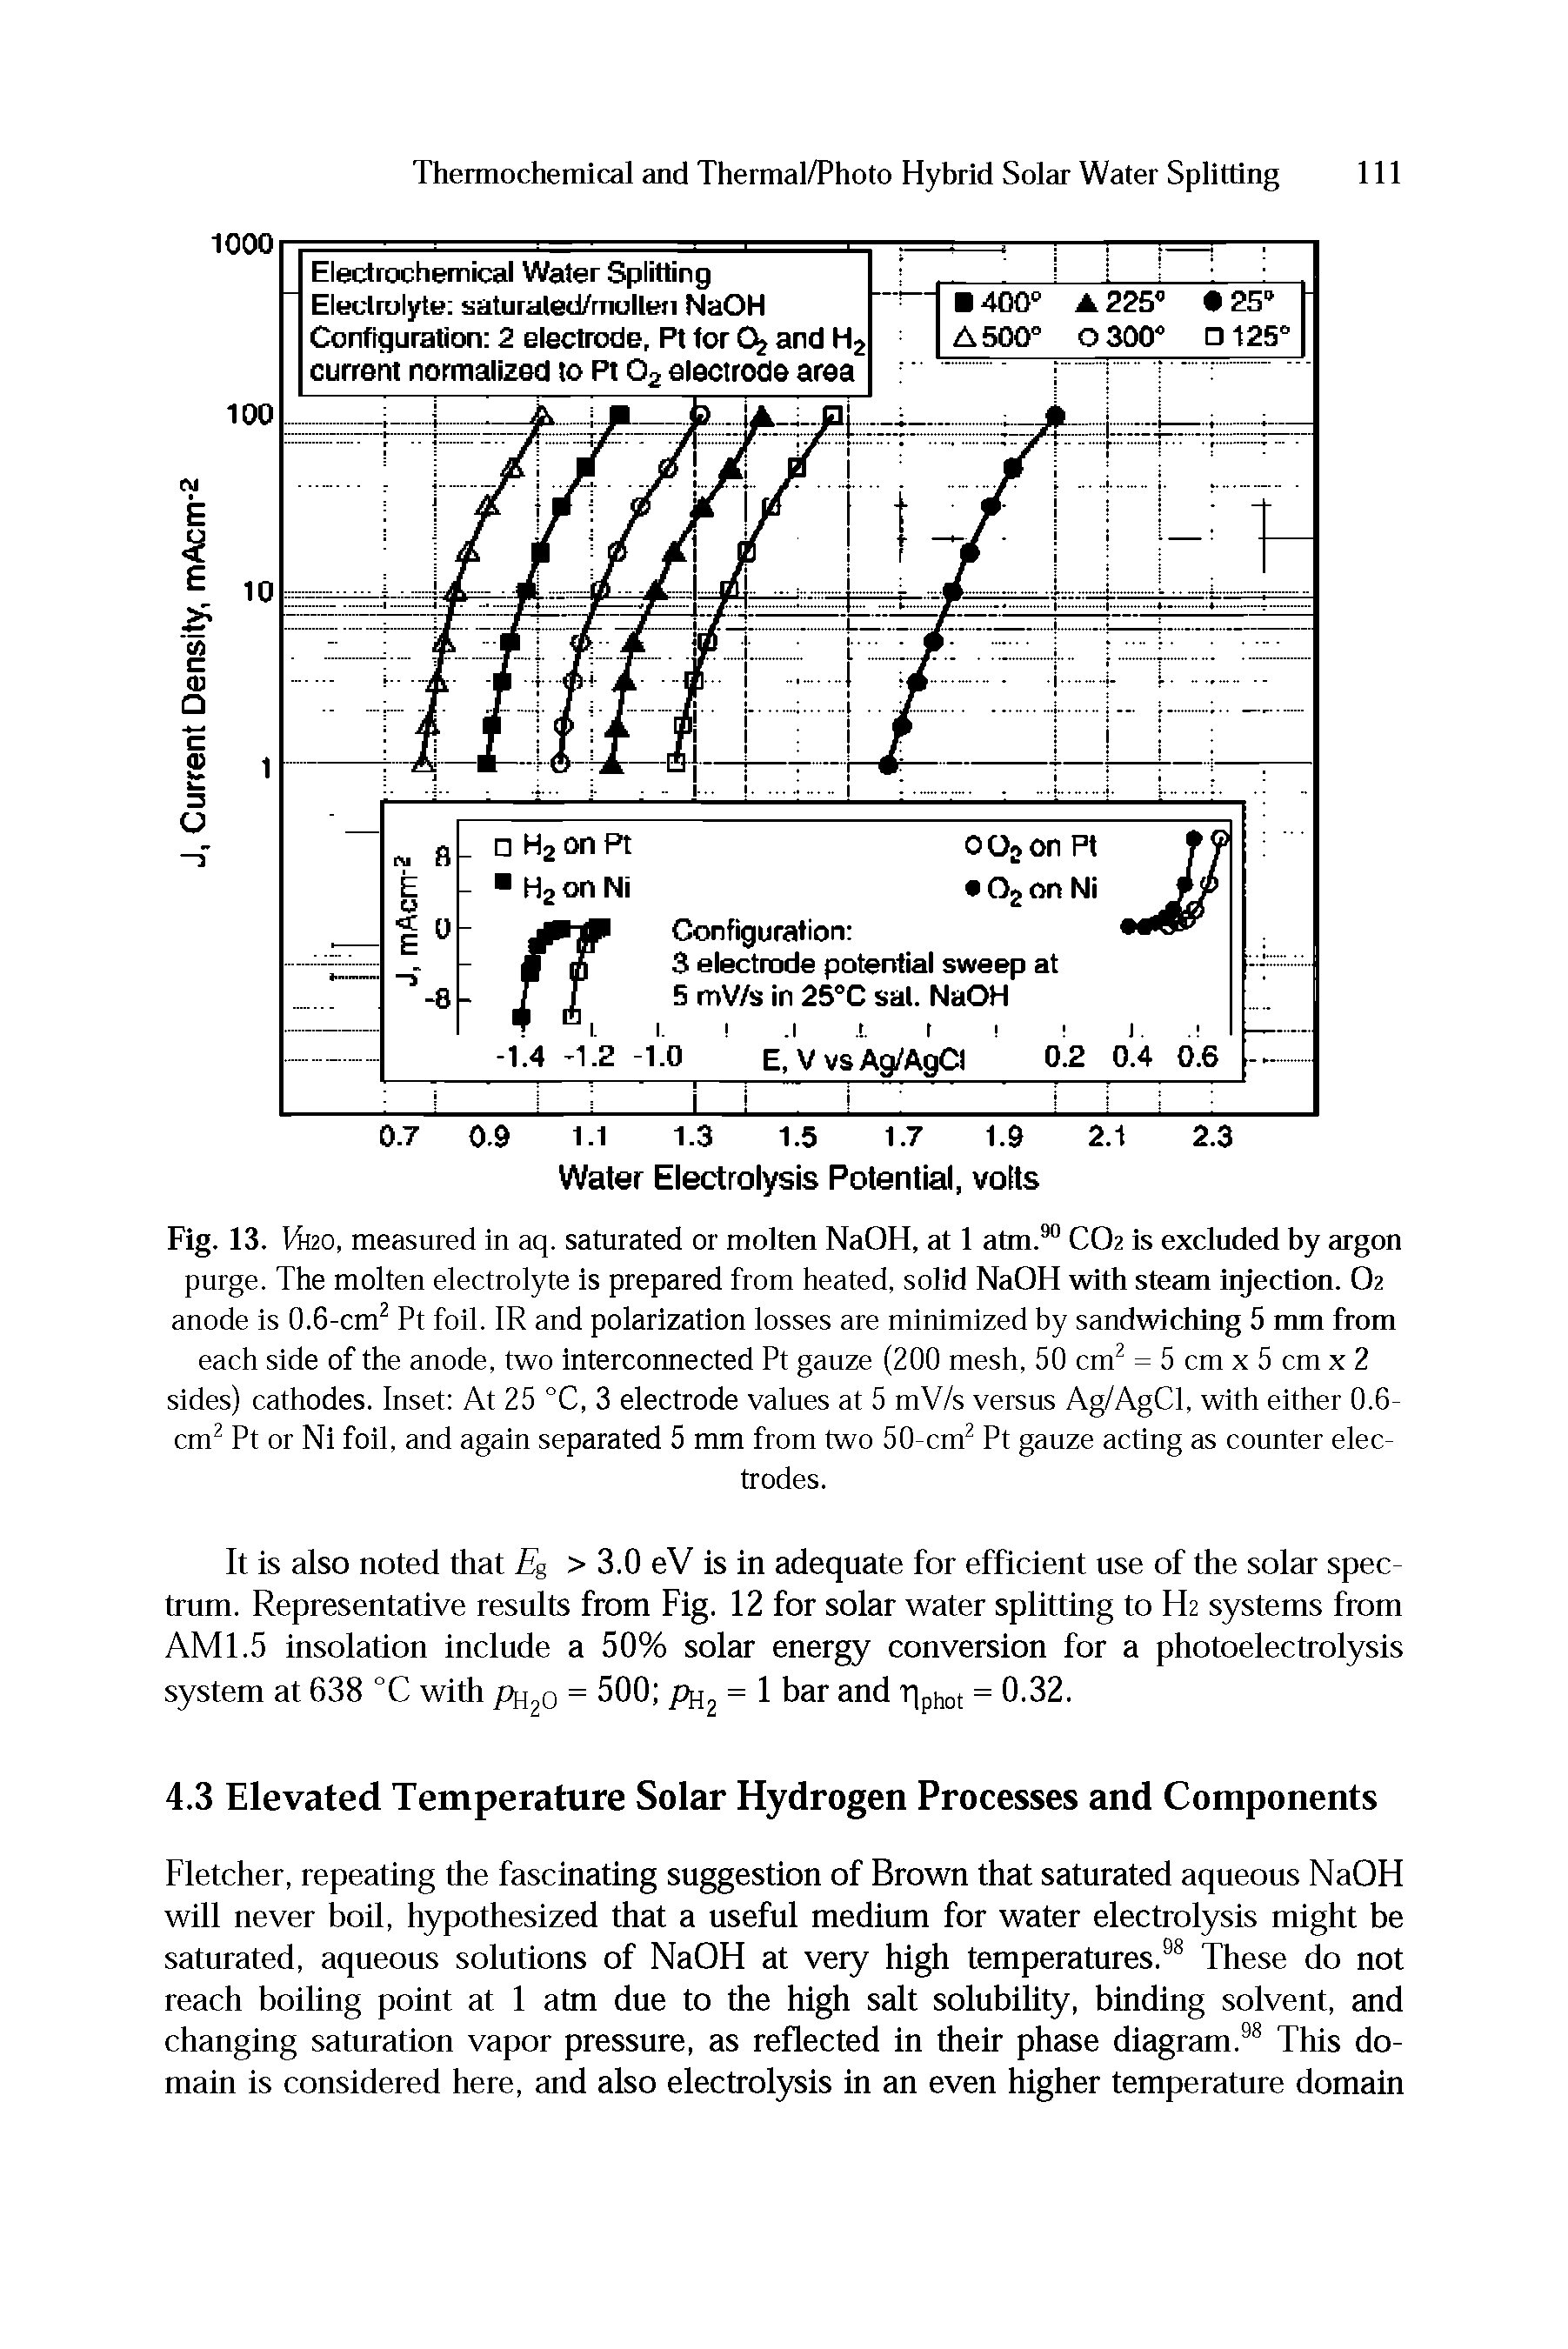 Fig. 13. Vh20, measured in aq. saturated or molten NaOH, at 1 atm.90 CO2 is excluded by argon purge. The molten electrolyte is prepared from heated, solid NaOH with steam injection. O2 anode is 0.6-cm2 Pt foil. IR and polarization losses are minimized by sandwiching 5 mm from each side of the anode, two interconnected Pt gauze (200 mesh, 50 cm2 = 5 cm x 5 cm x 2 sides) cathodes. Inset At 25 °C, 3 electrode values at 5 mV/s versus Ag/AgCl, with either 0.6-cm2 Pt or Ni foil, and again separated 5 mm from two 50-cm2 Pt gauze acting as counter electrodes.